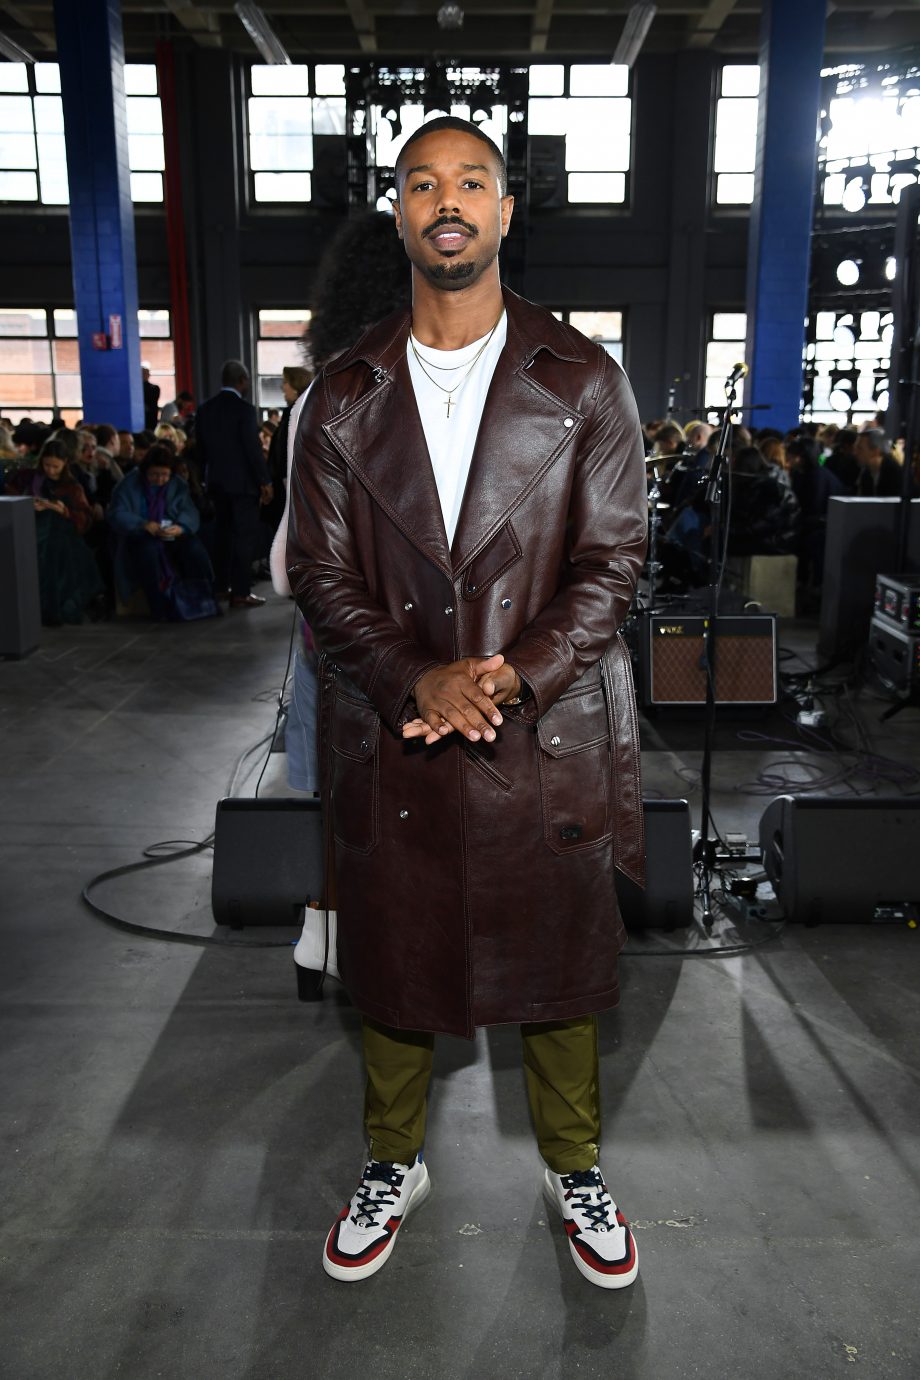 Piaget - Michael B Jordan attended the Coach Fashion Show for New York  Fashion Week, complimenting his new capsule collection with a Piaget  Vintage Inspiration Bracelet watch. The watch is 1960s inspired